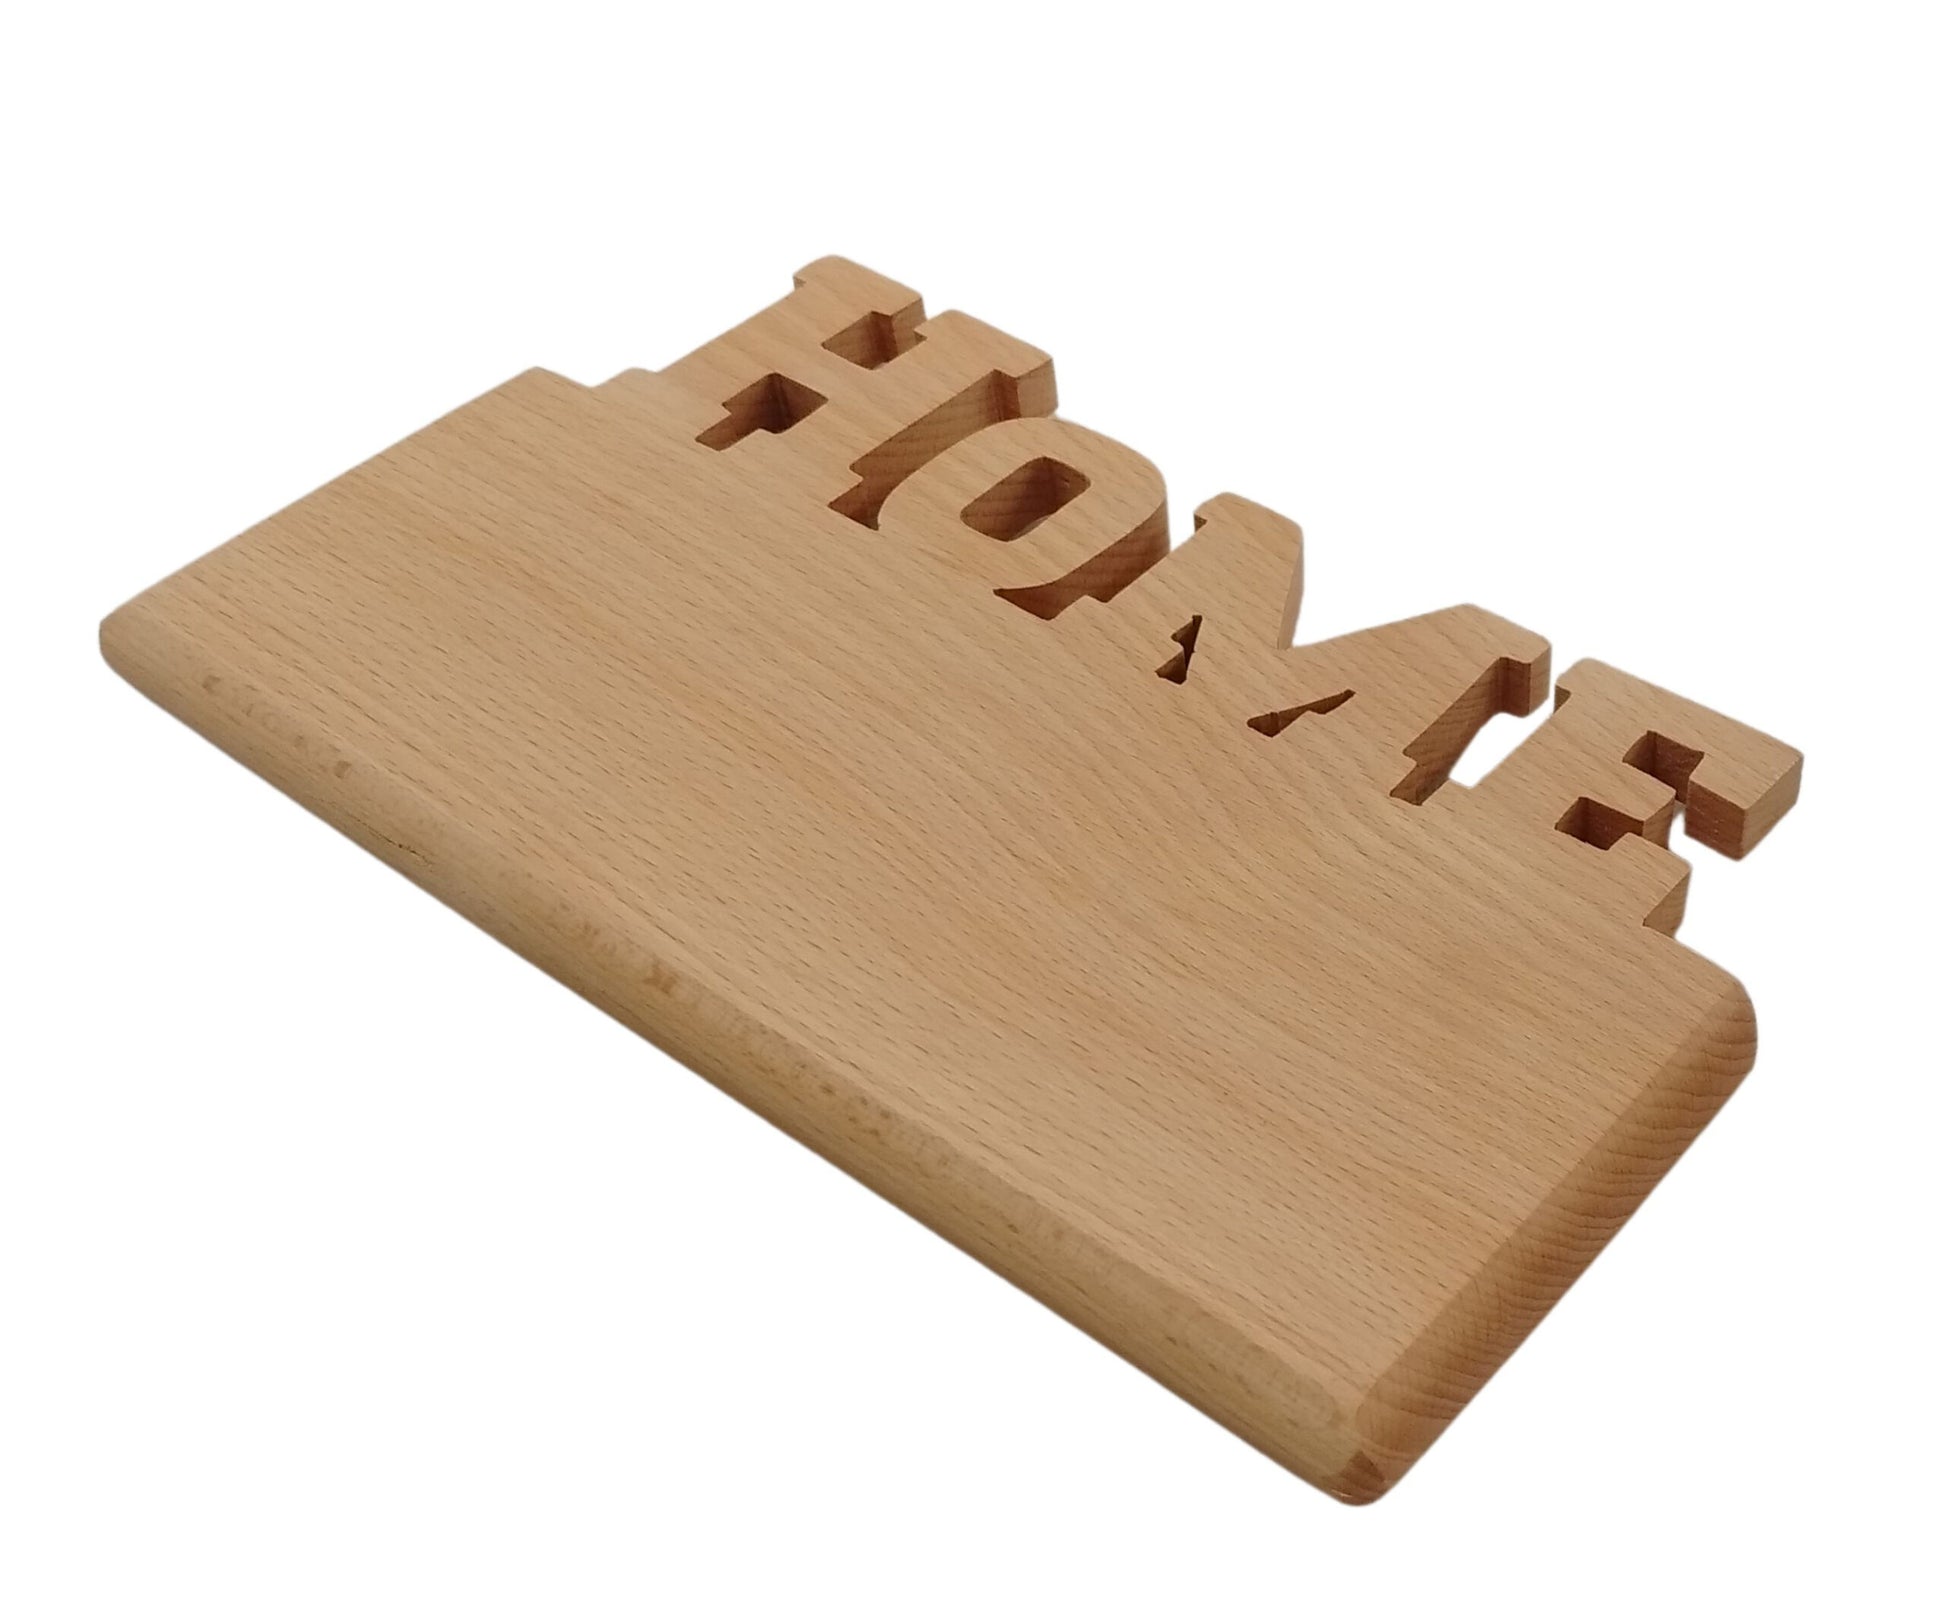 Personalized Engraved Home Shaped Wooden Plaque